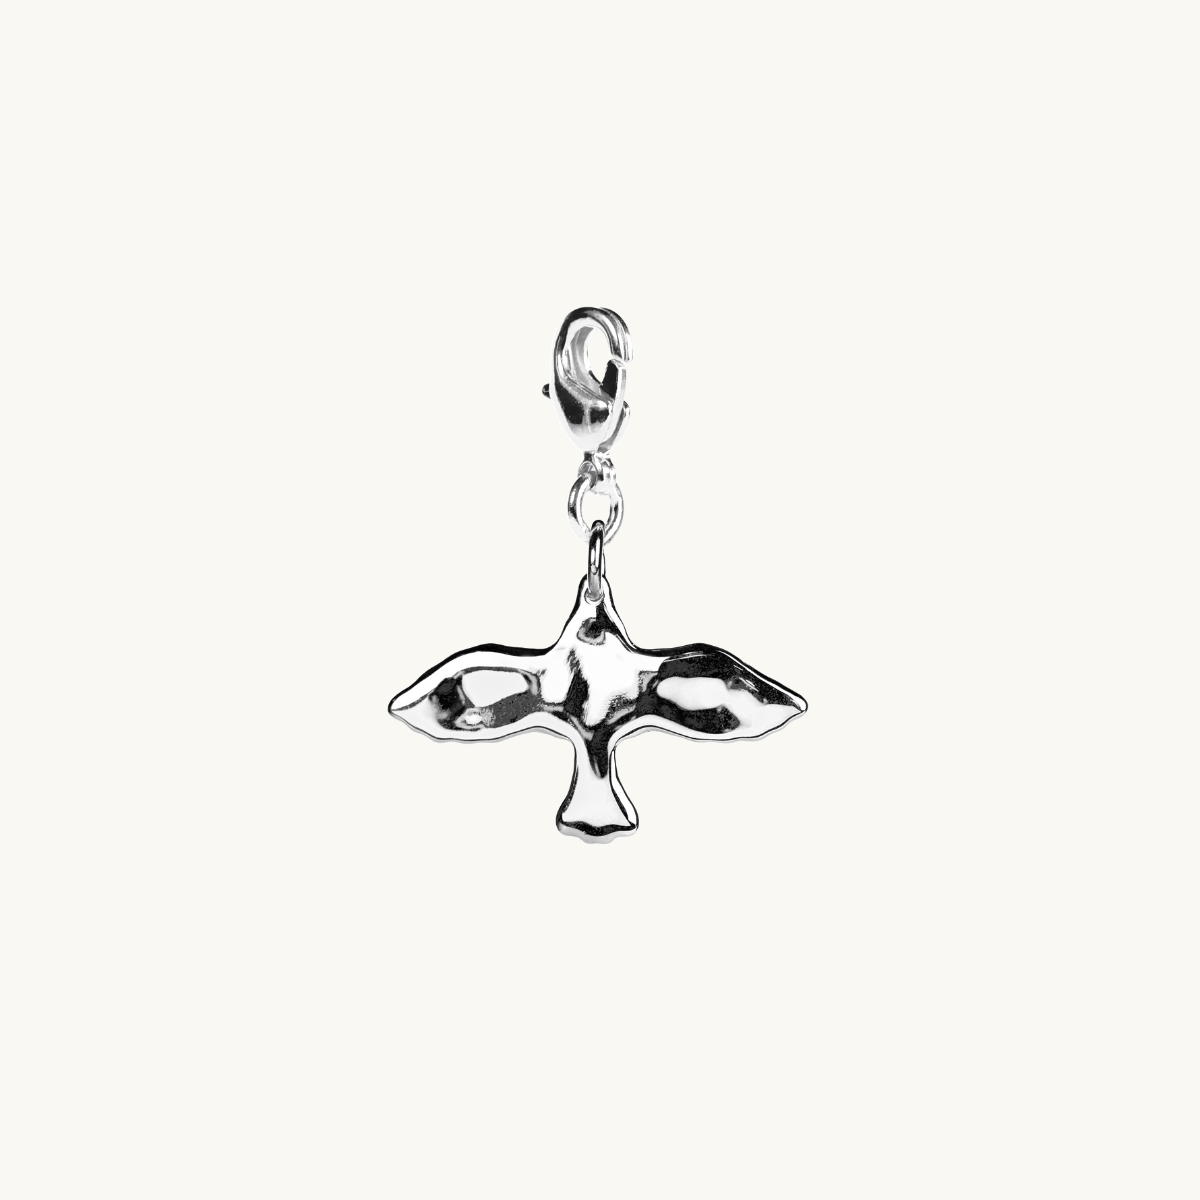 Uneven dove charm in sterling silver